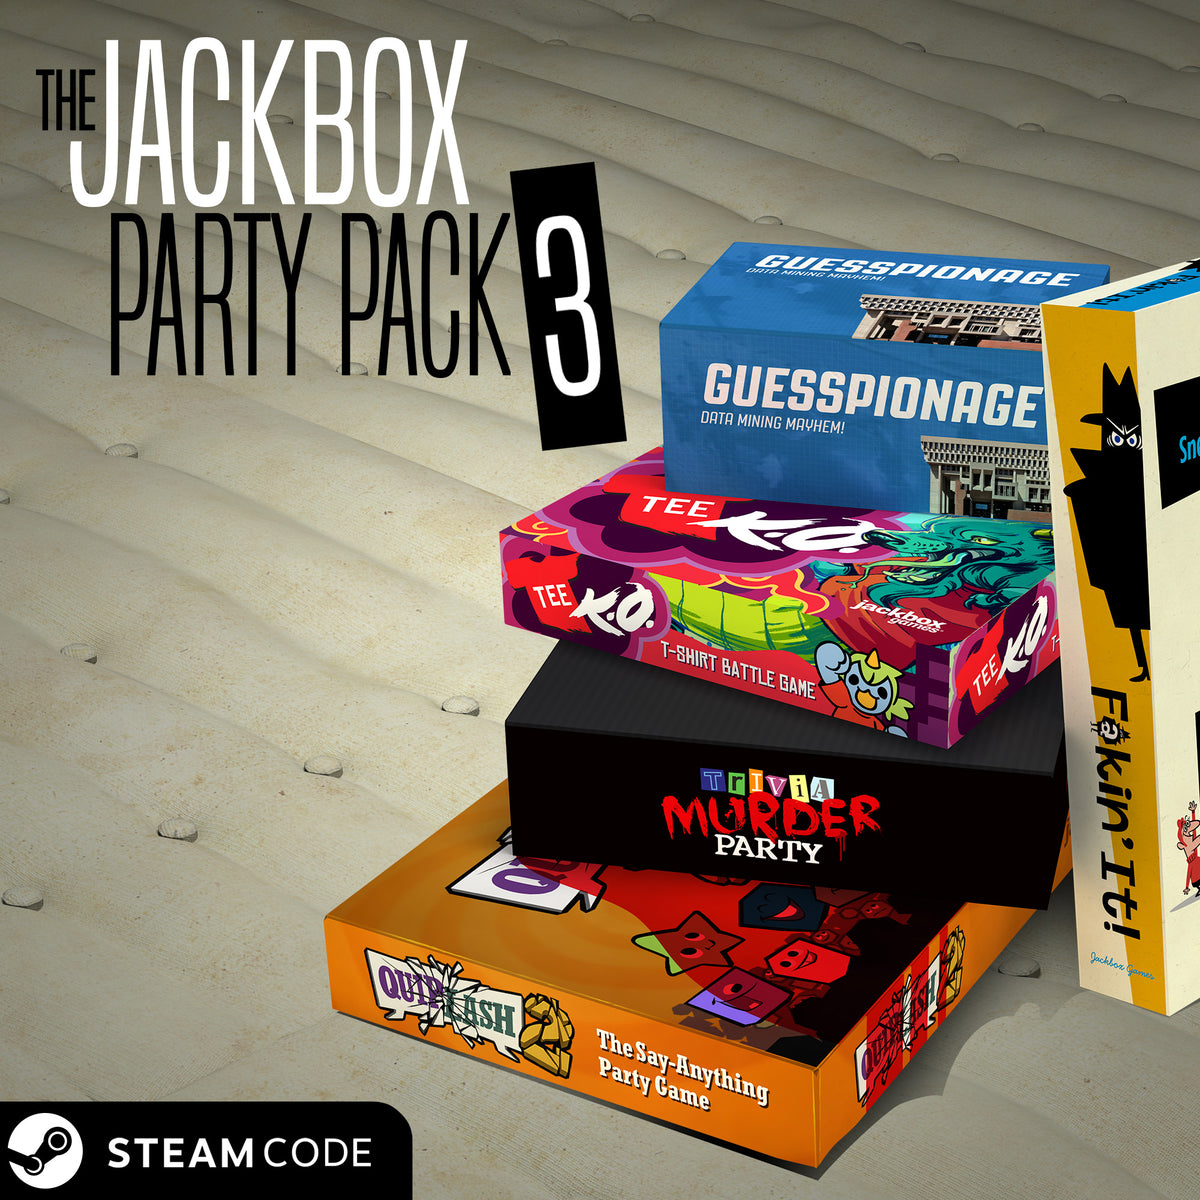 My collection of 3 browser games - they are digital board games built  similar to Jackbox Party Packs, but even more portable : playmygame